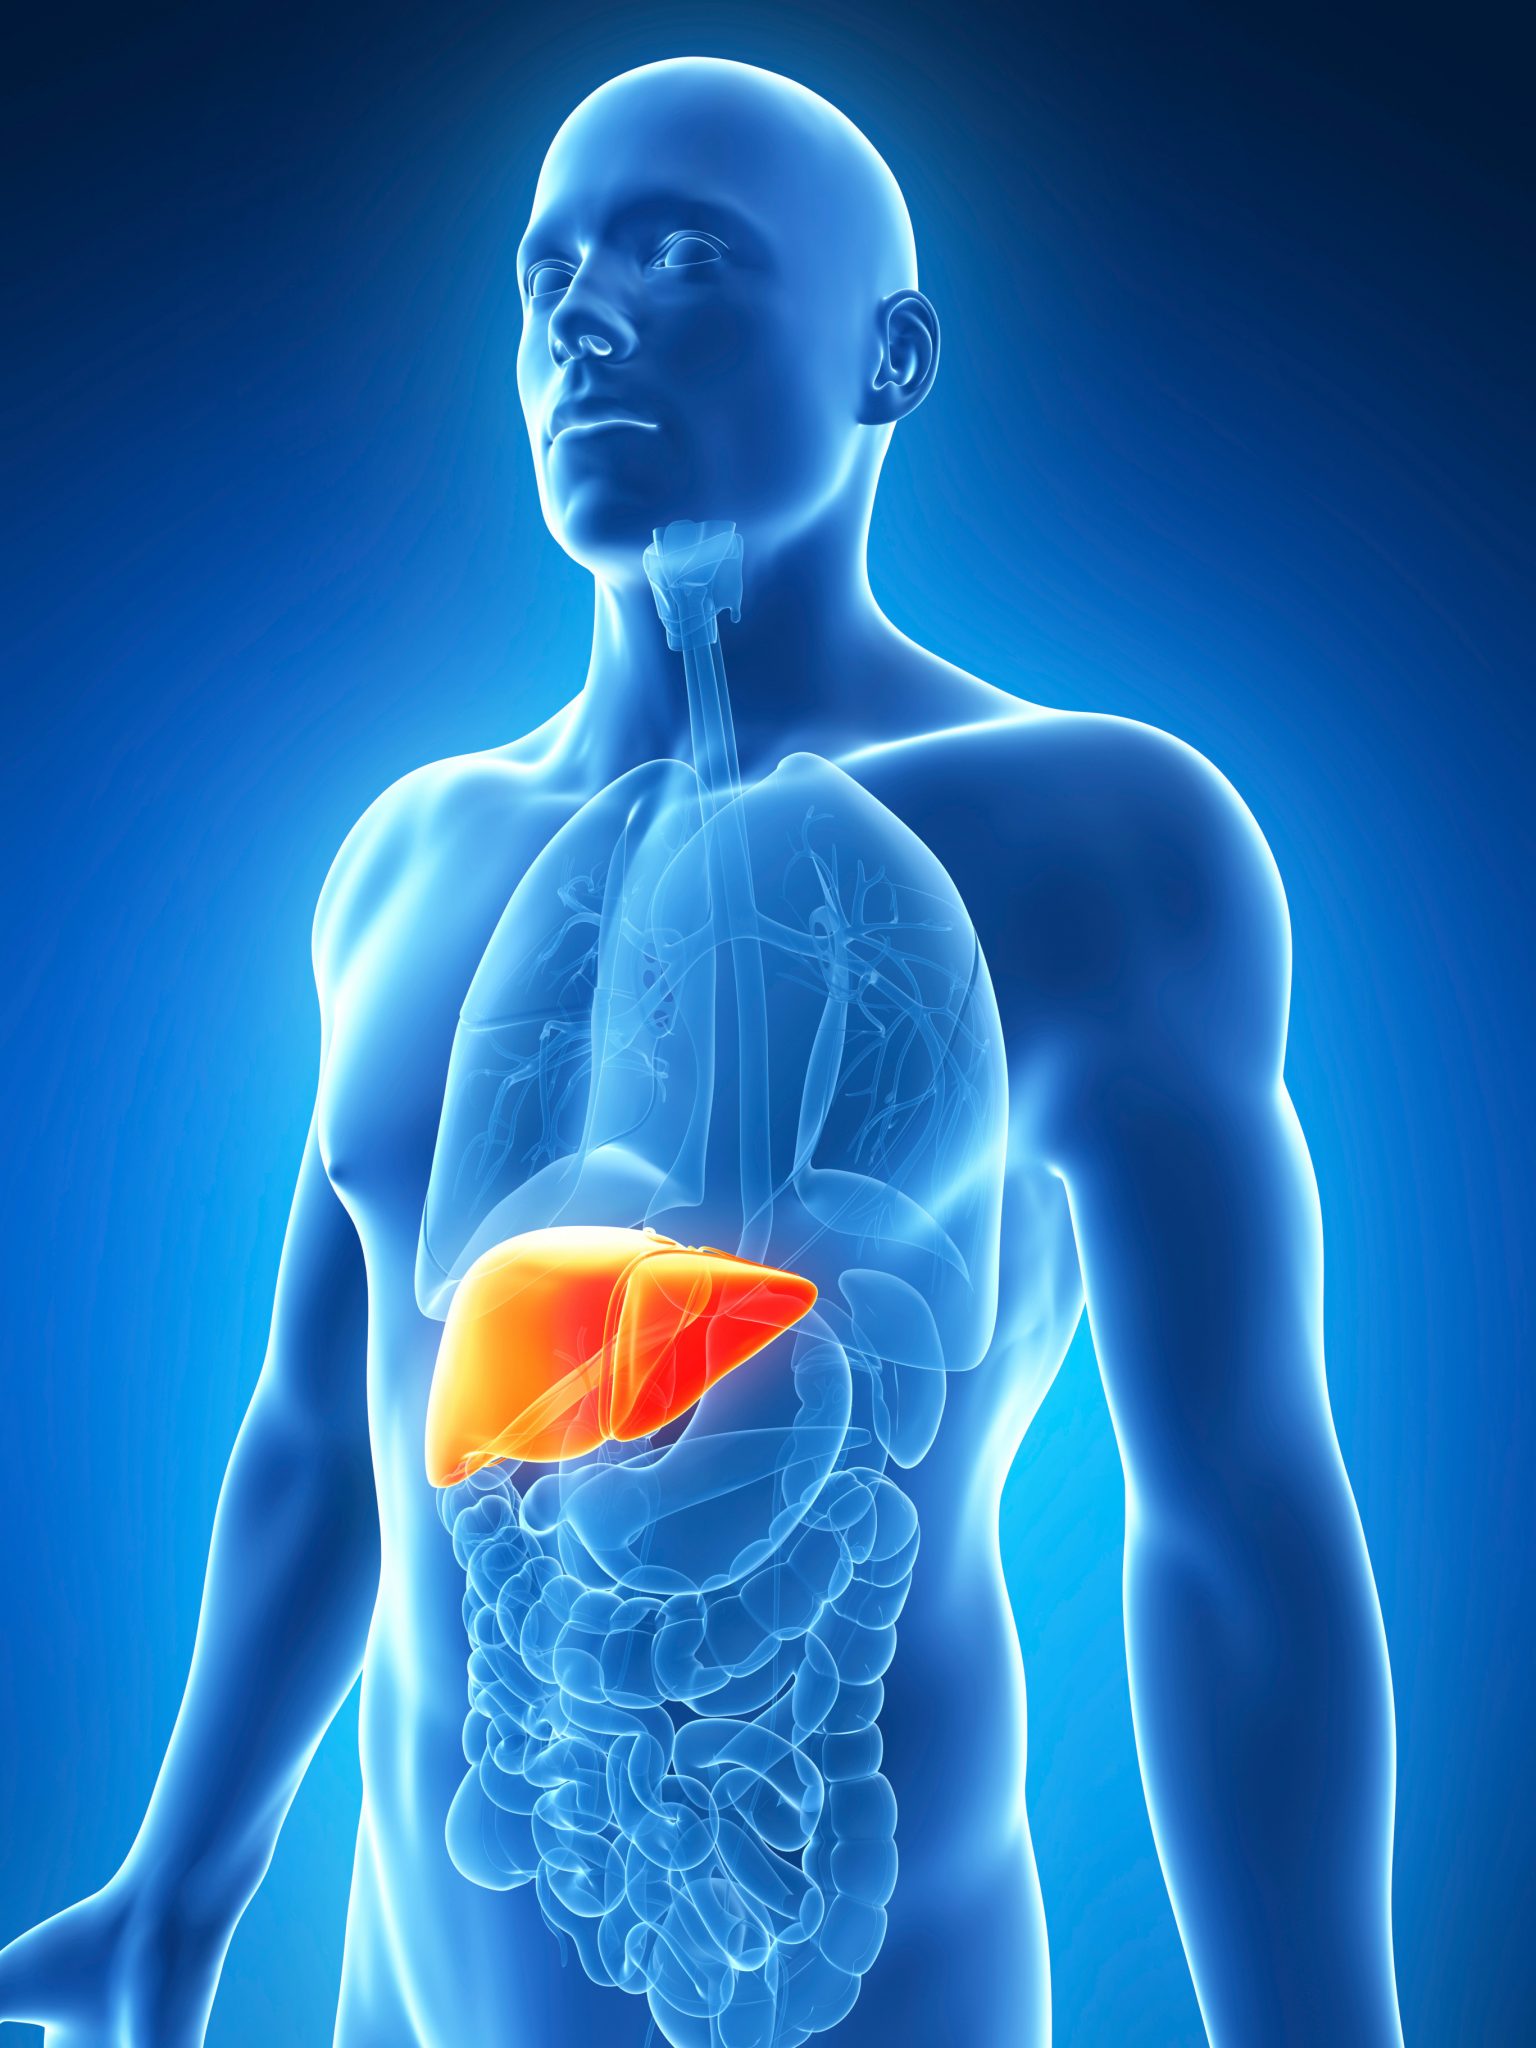 Costs and prices of entecavir to treat Hepatitis B